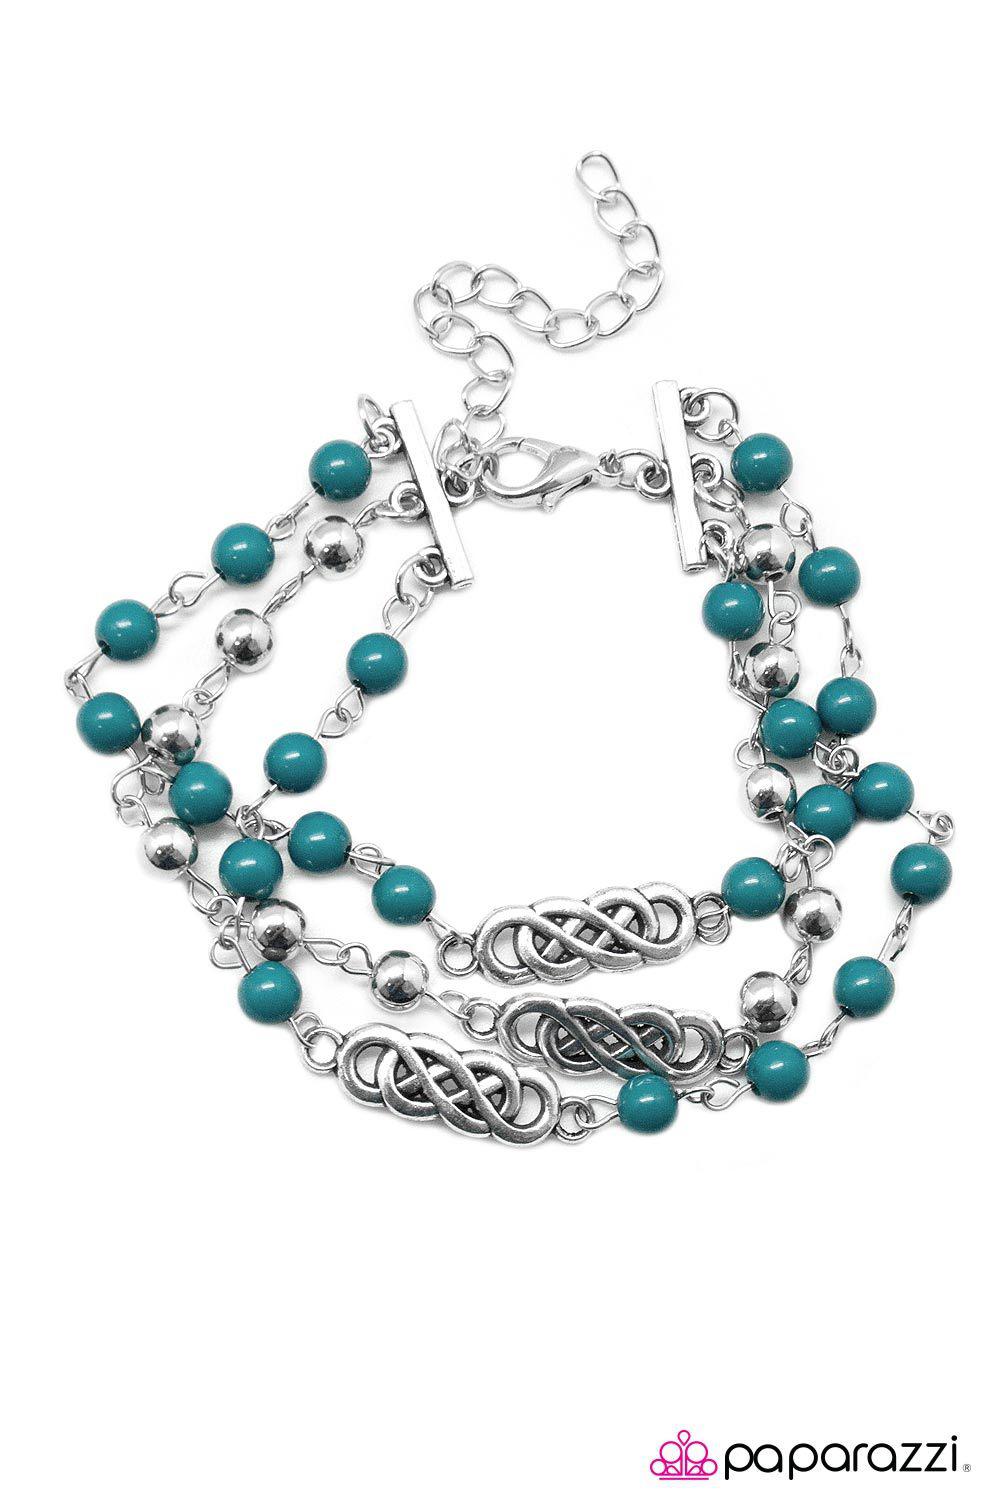 Ever Everlasting Blue and Silver Bracelet - Paparazzi Accessories-CarasShop.com - $5 Jewelry by Cara Jewels